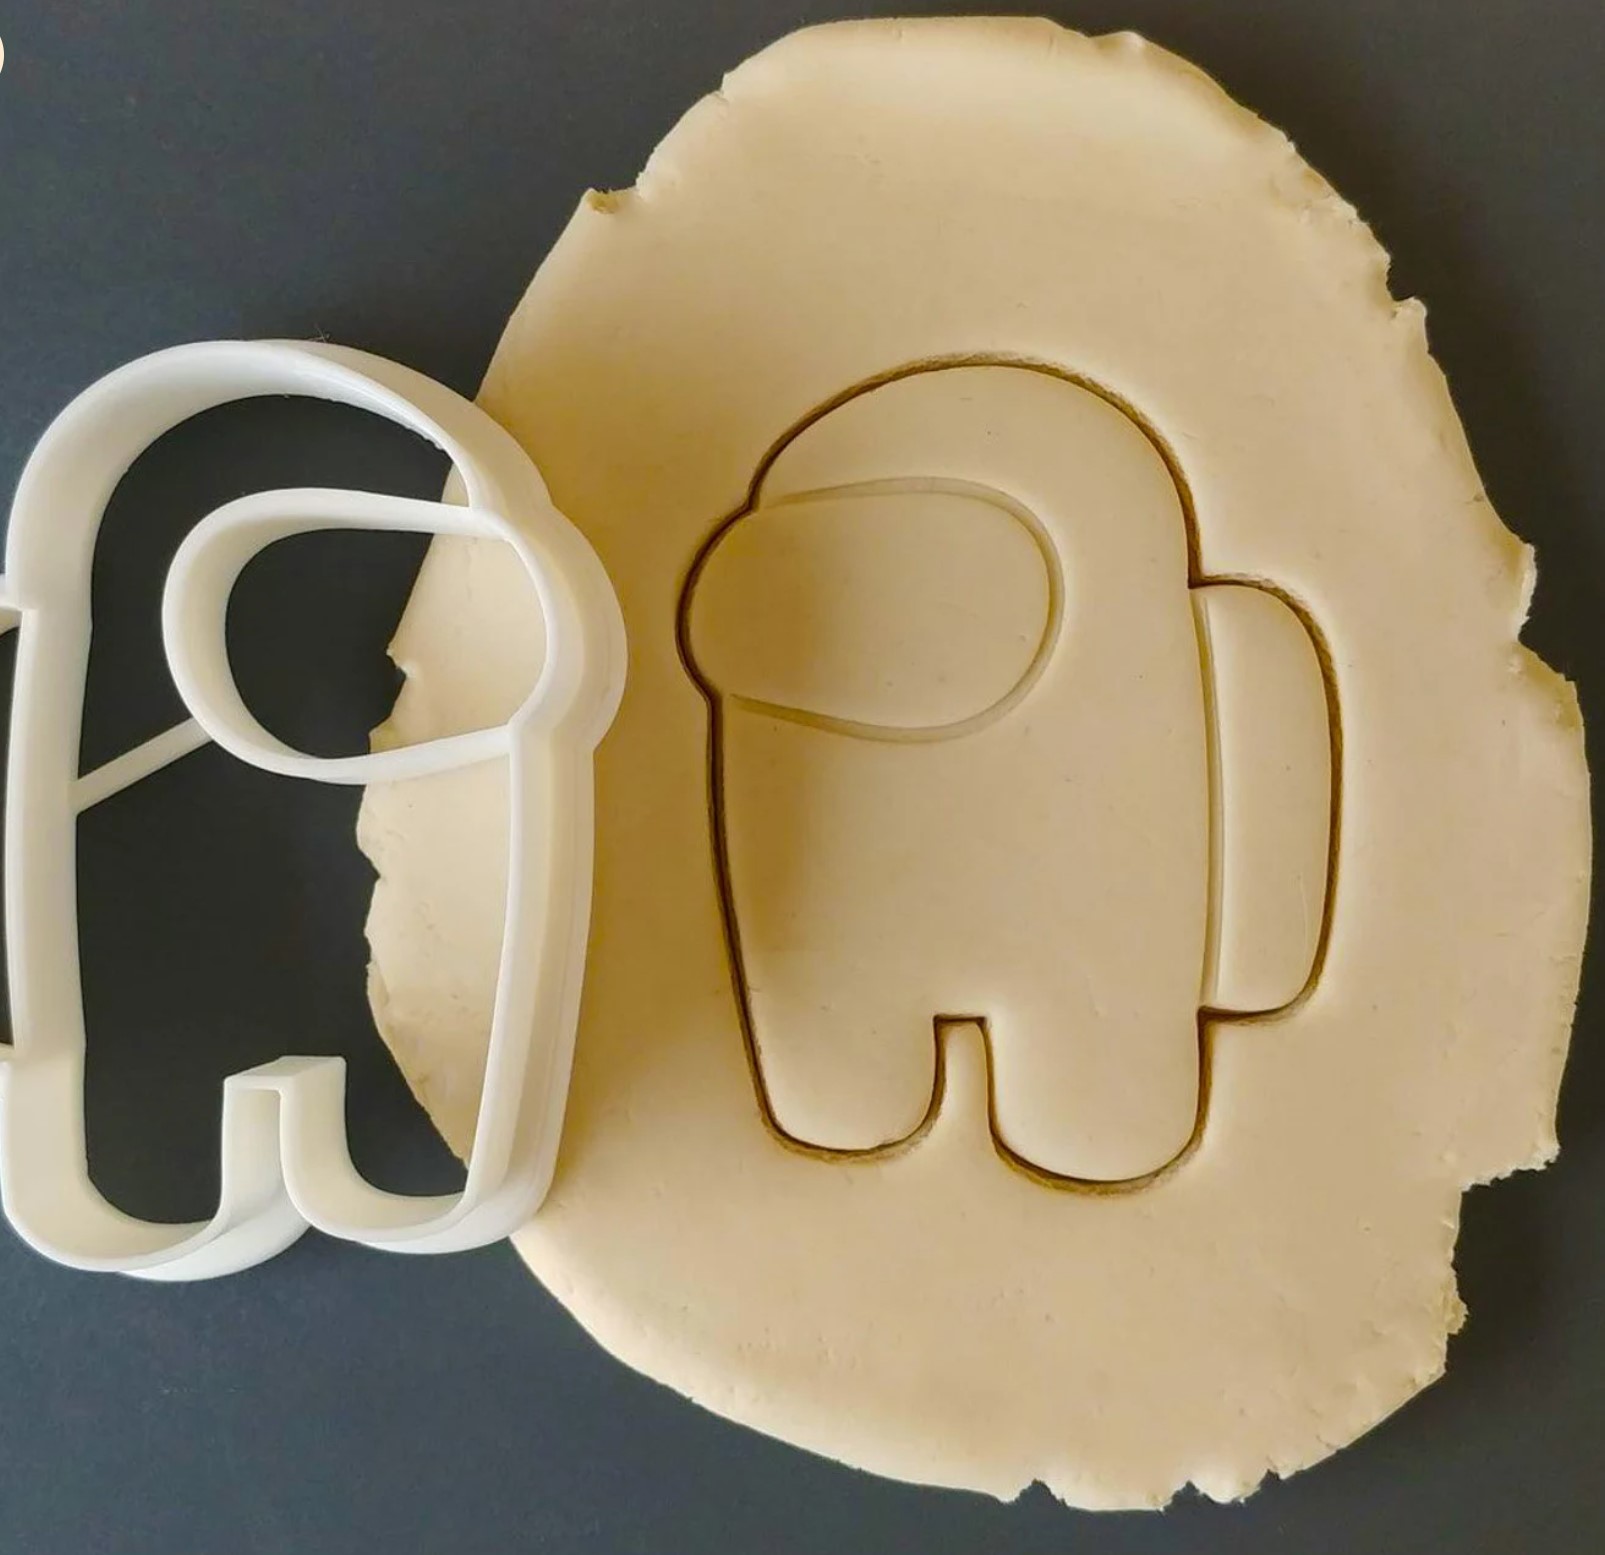 Crewmate. Among Us Cookie Cutter. Astronaut Gamer Cookie Cutter